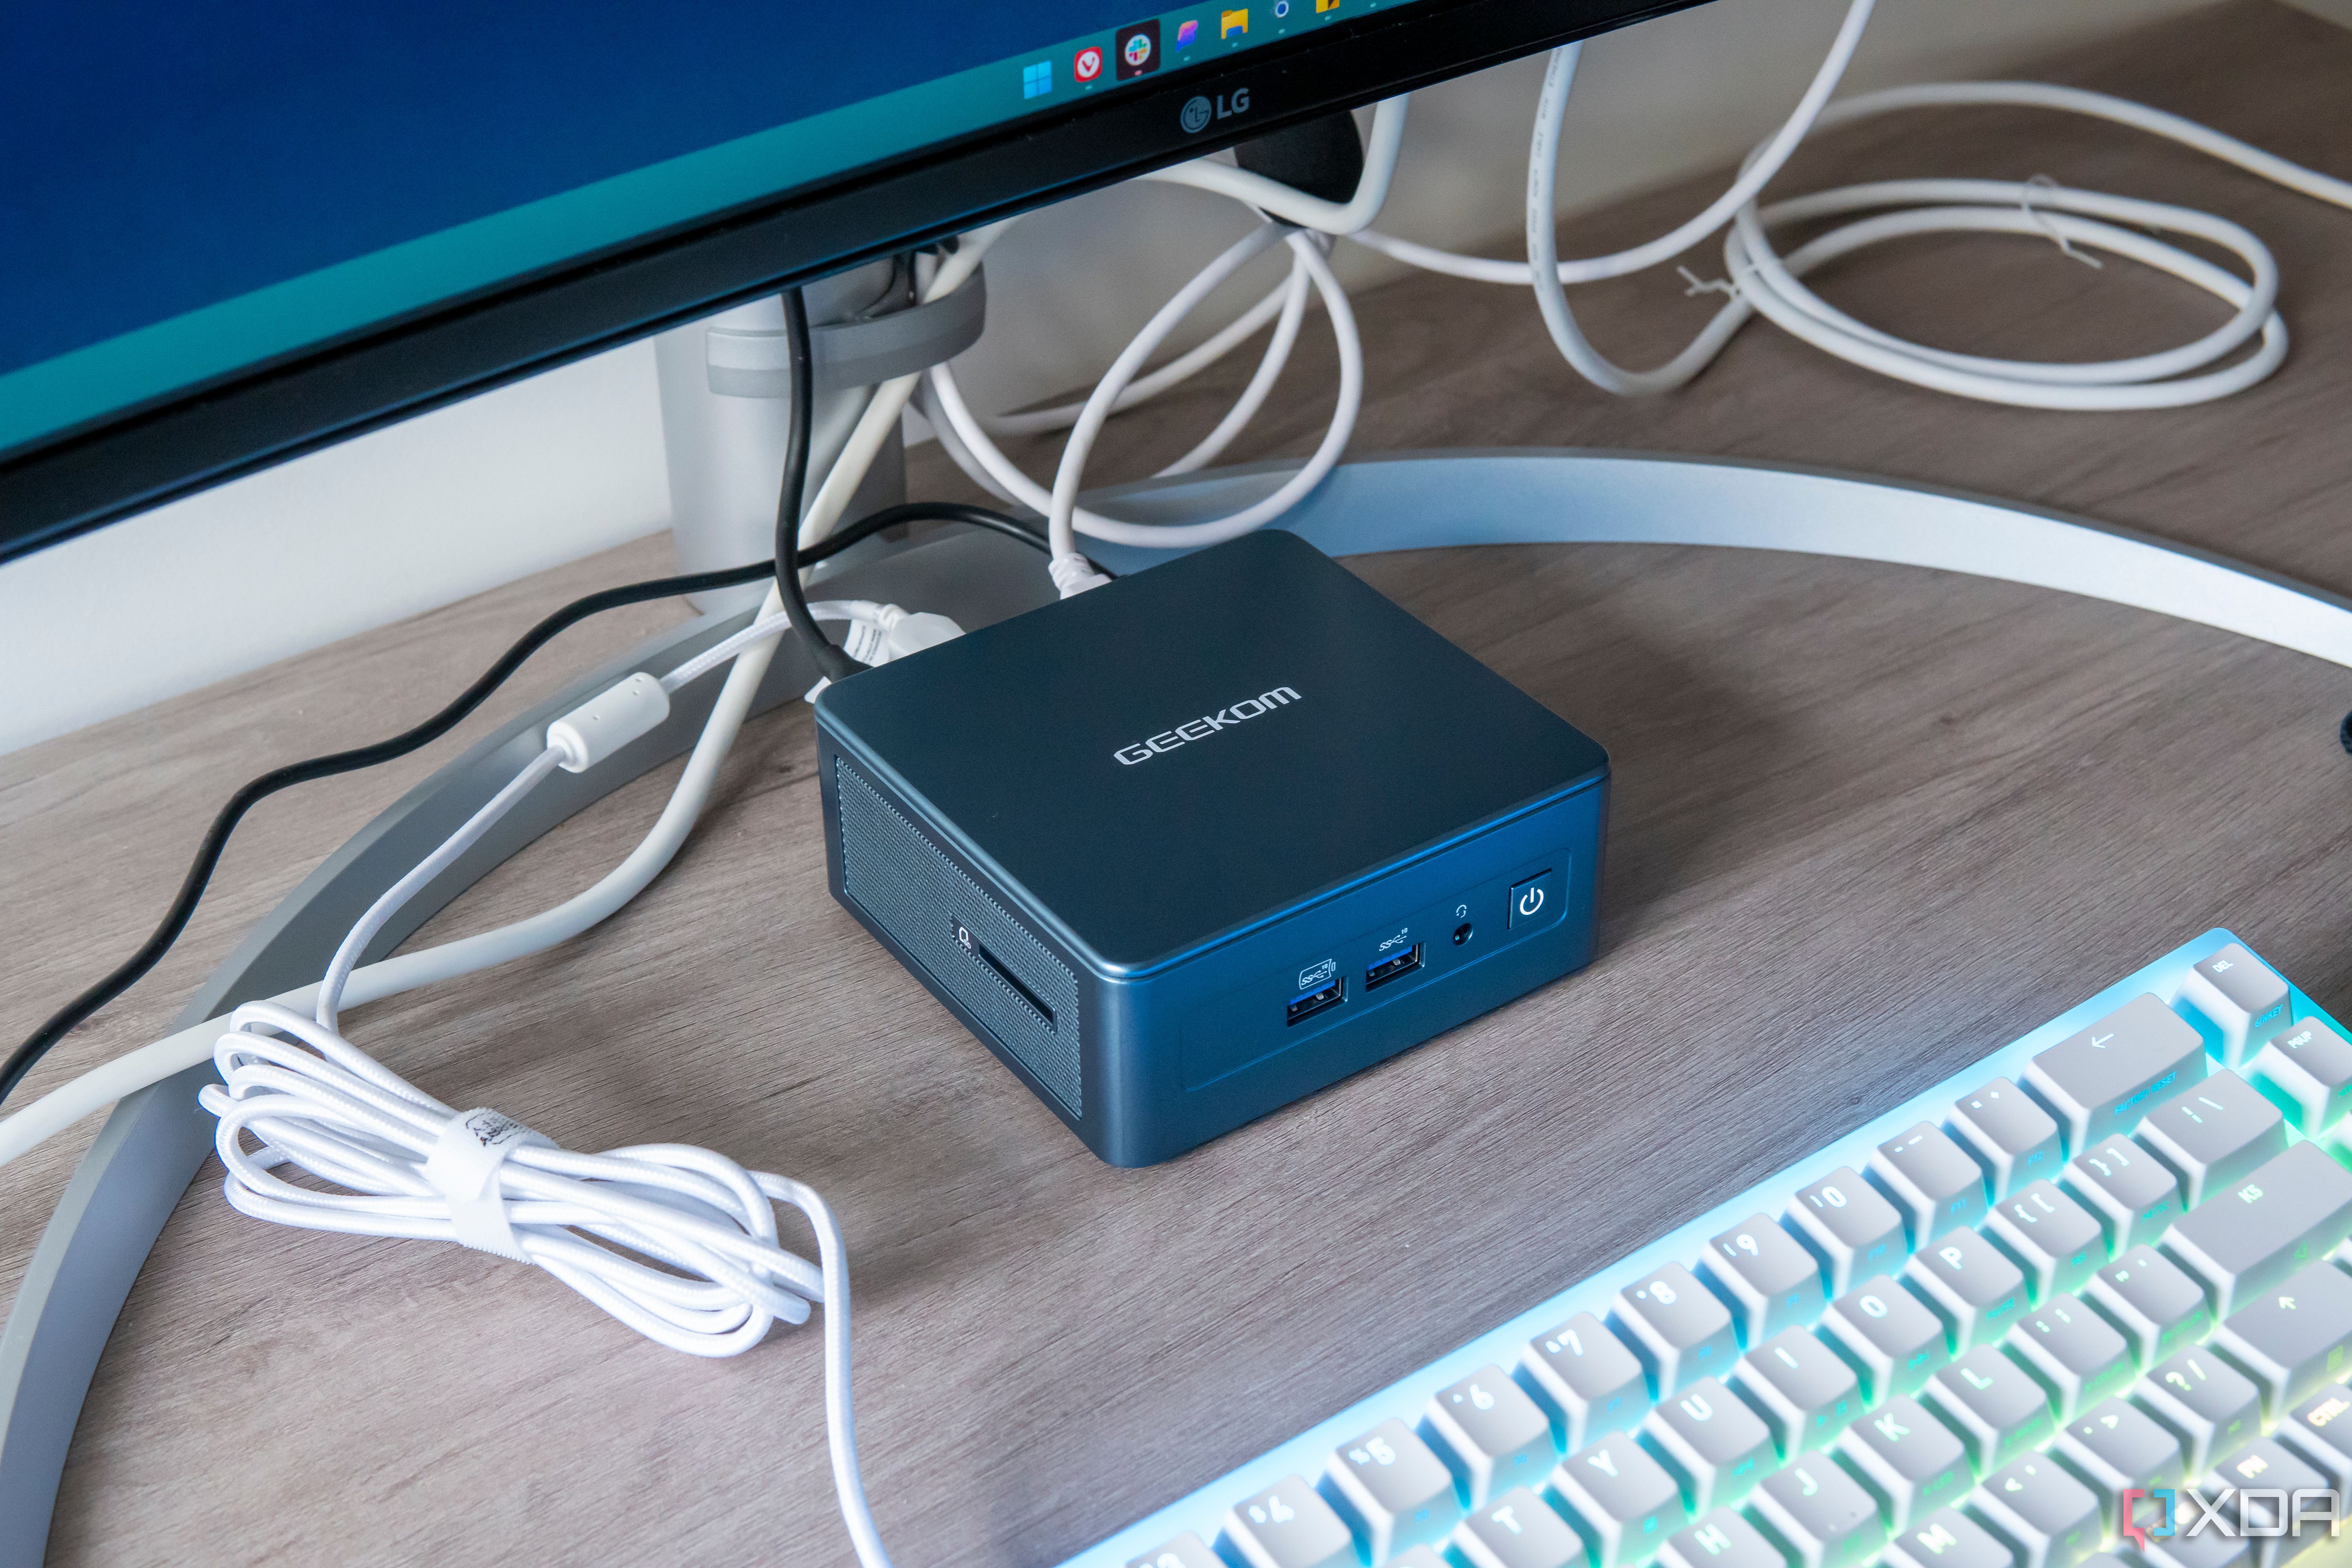 4 reasons why Windows is the best OS for mini PCs